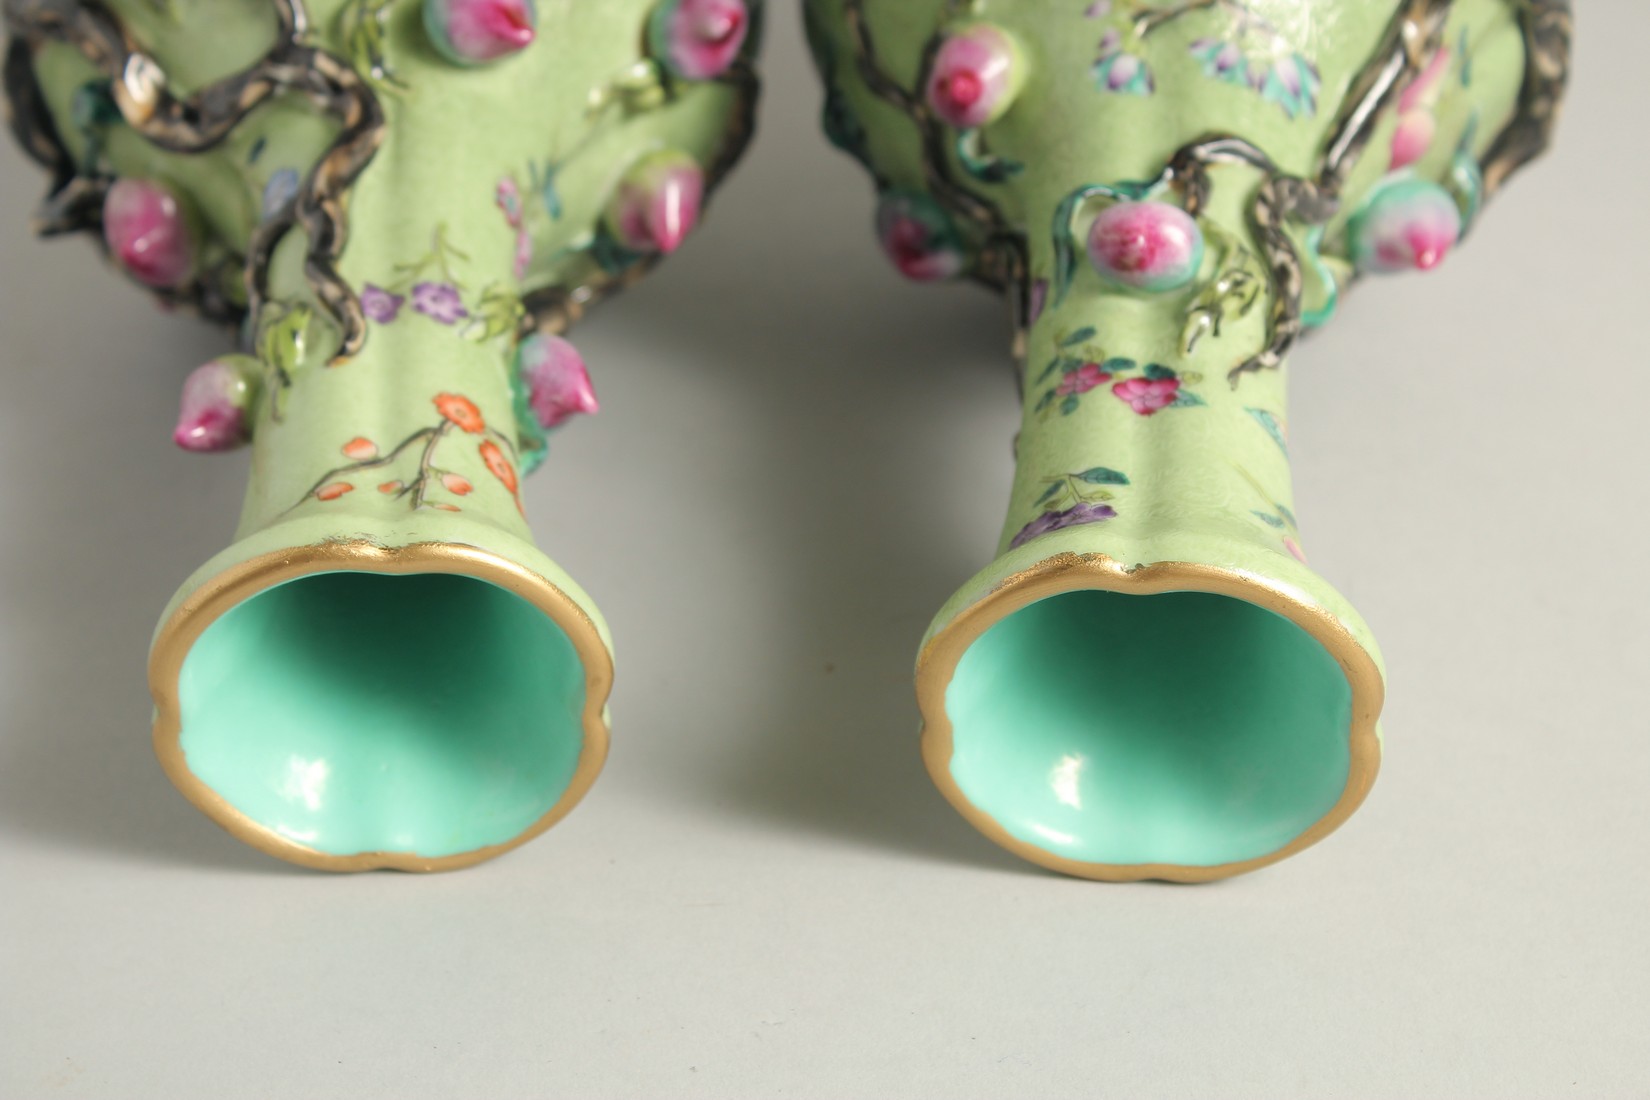 A PAIR OF CHINESE GREEN GROUND PORCELAIN VASES, with relief peach blossom and further decorated with - Image 5 of 8